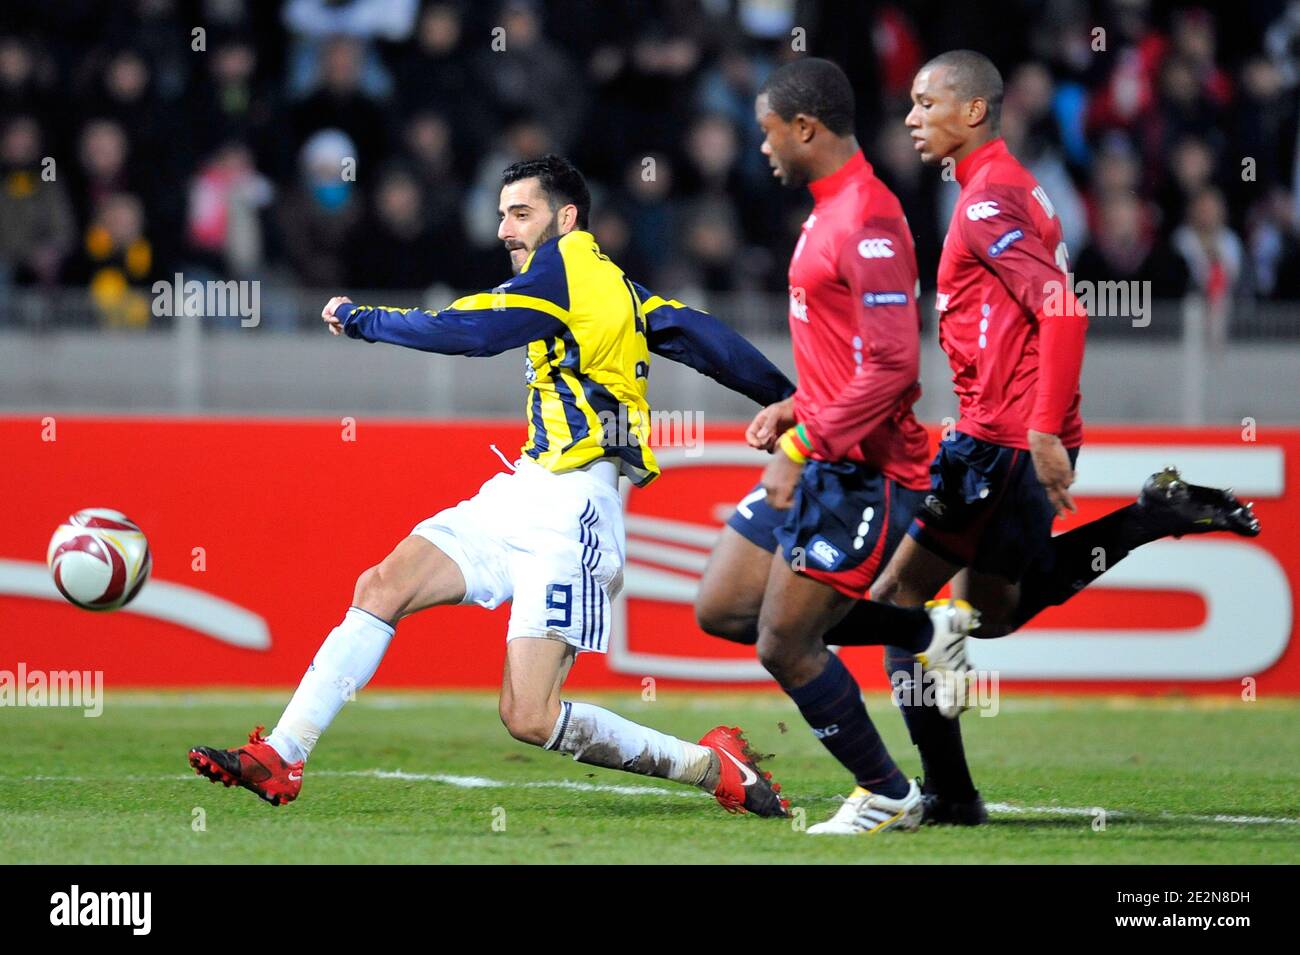 Lille's Aurelien Chedjou, Emerson and Fenerbahce's Daniel Guiza during the UEFA Europa League soccer match, LOSC Lille Metropole vs Fenerbahce SK at the Stadium Nord in Villeneuve d'Ascq, France on February 18, 2010. Lille won 2-1. Photo by Stephane Reix/ABACAPRESS.COM Stock Photo